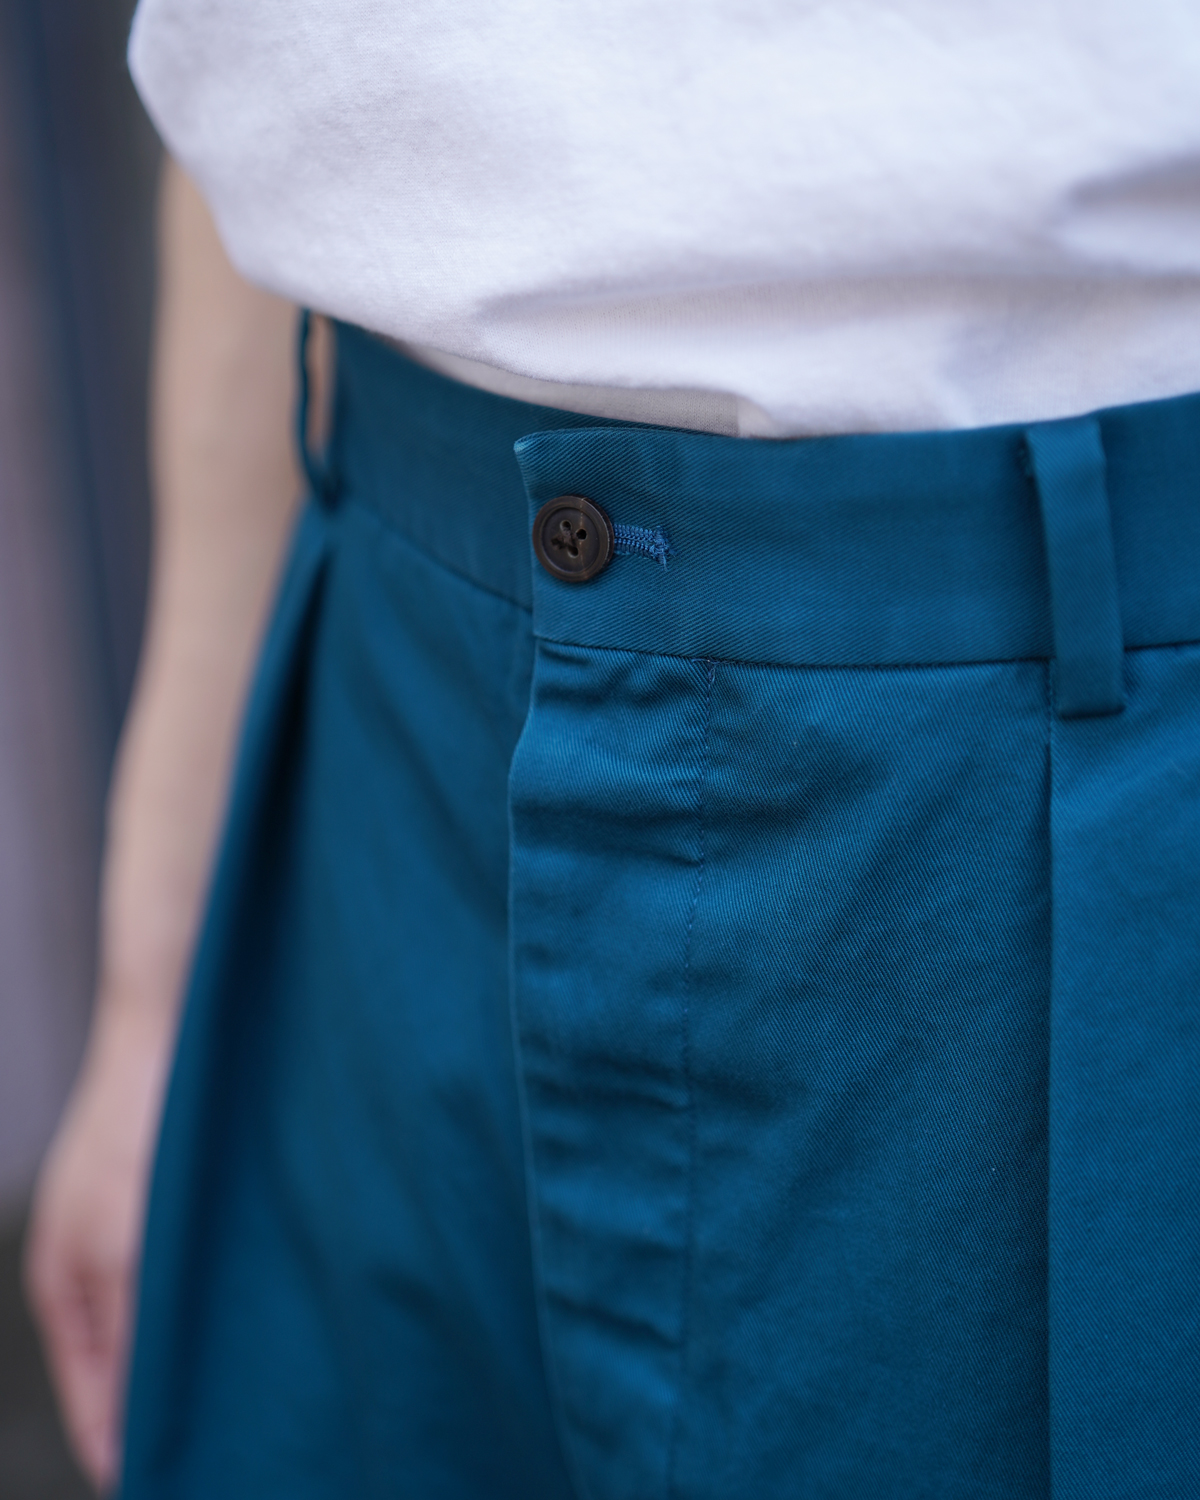 NEAT｜NEAT Chino Shorts - Blue Green｜PRODUCT｜Continuer Inc